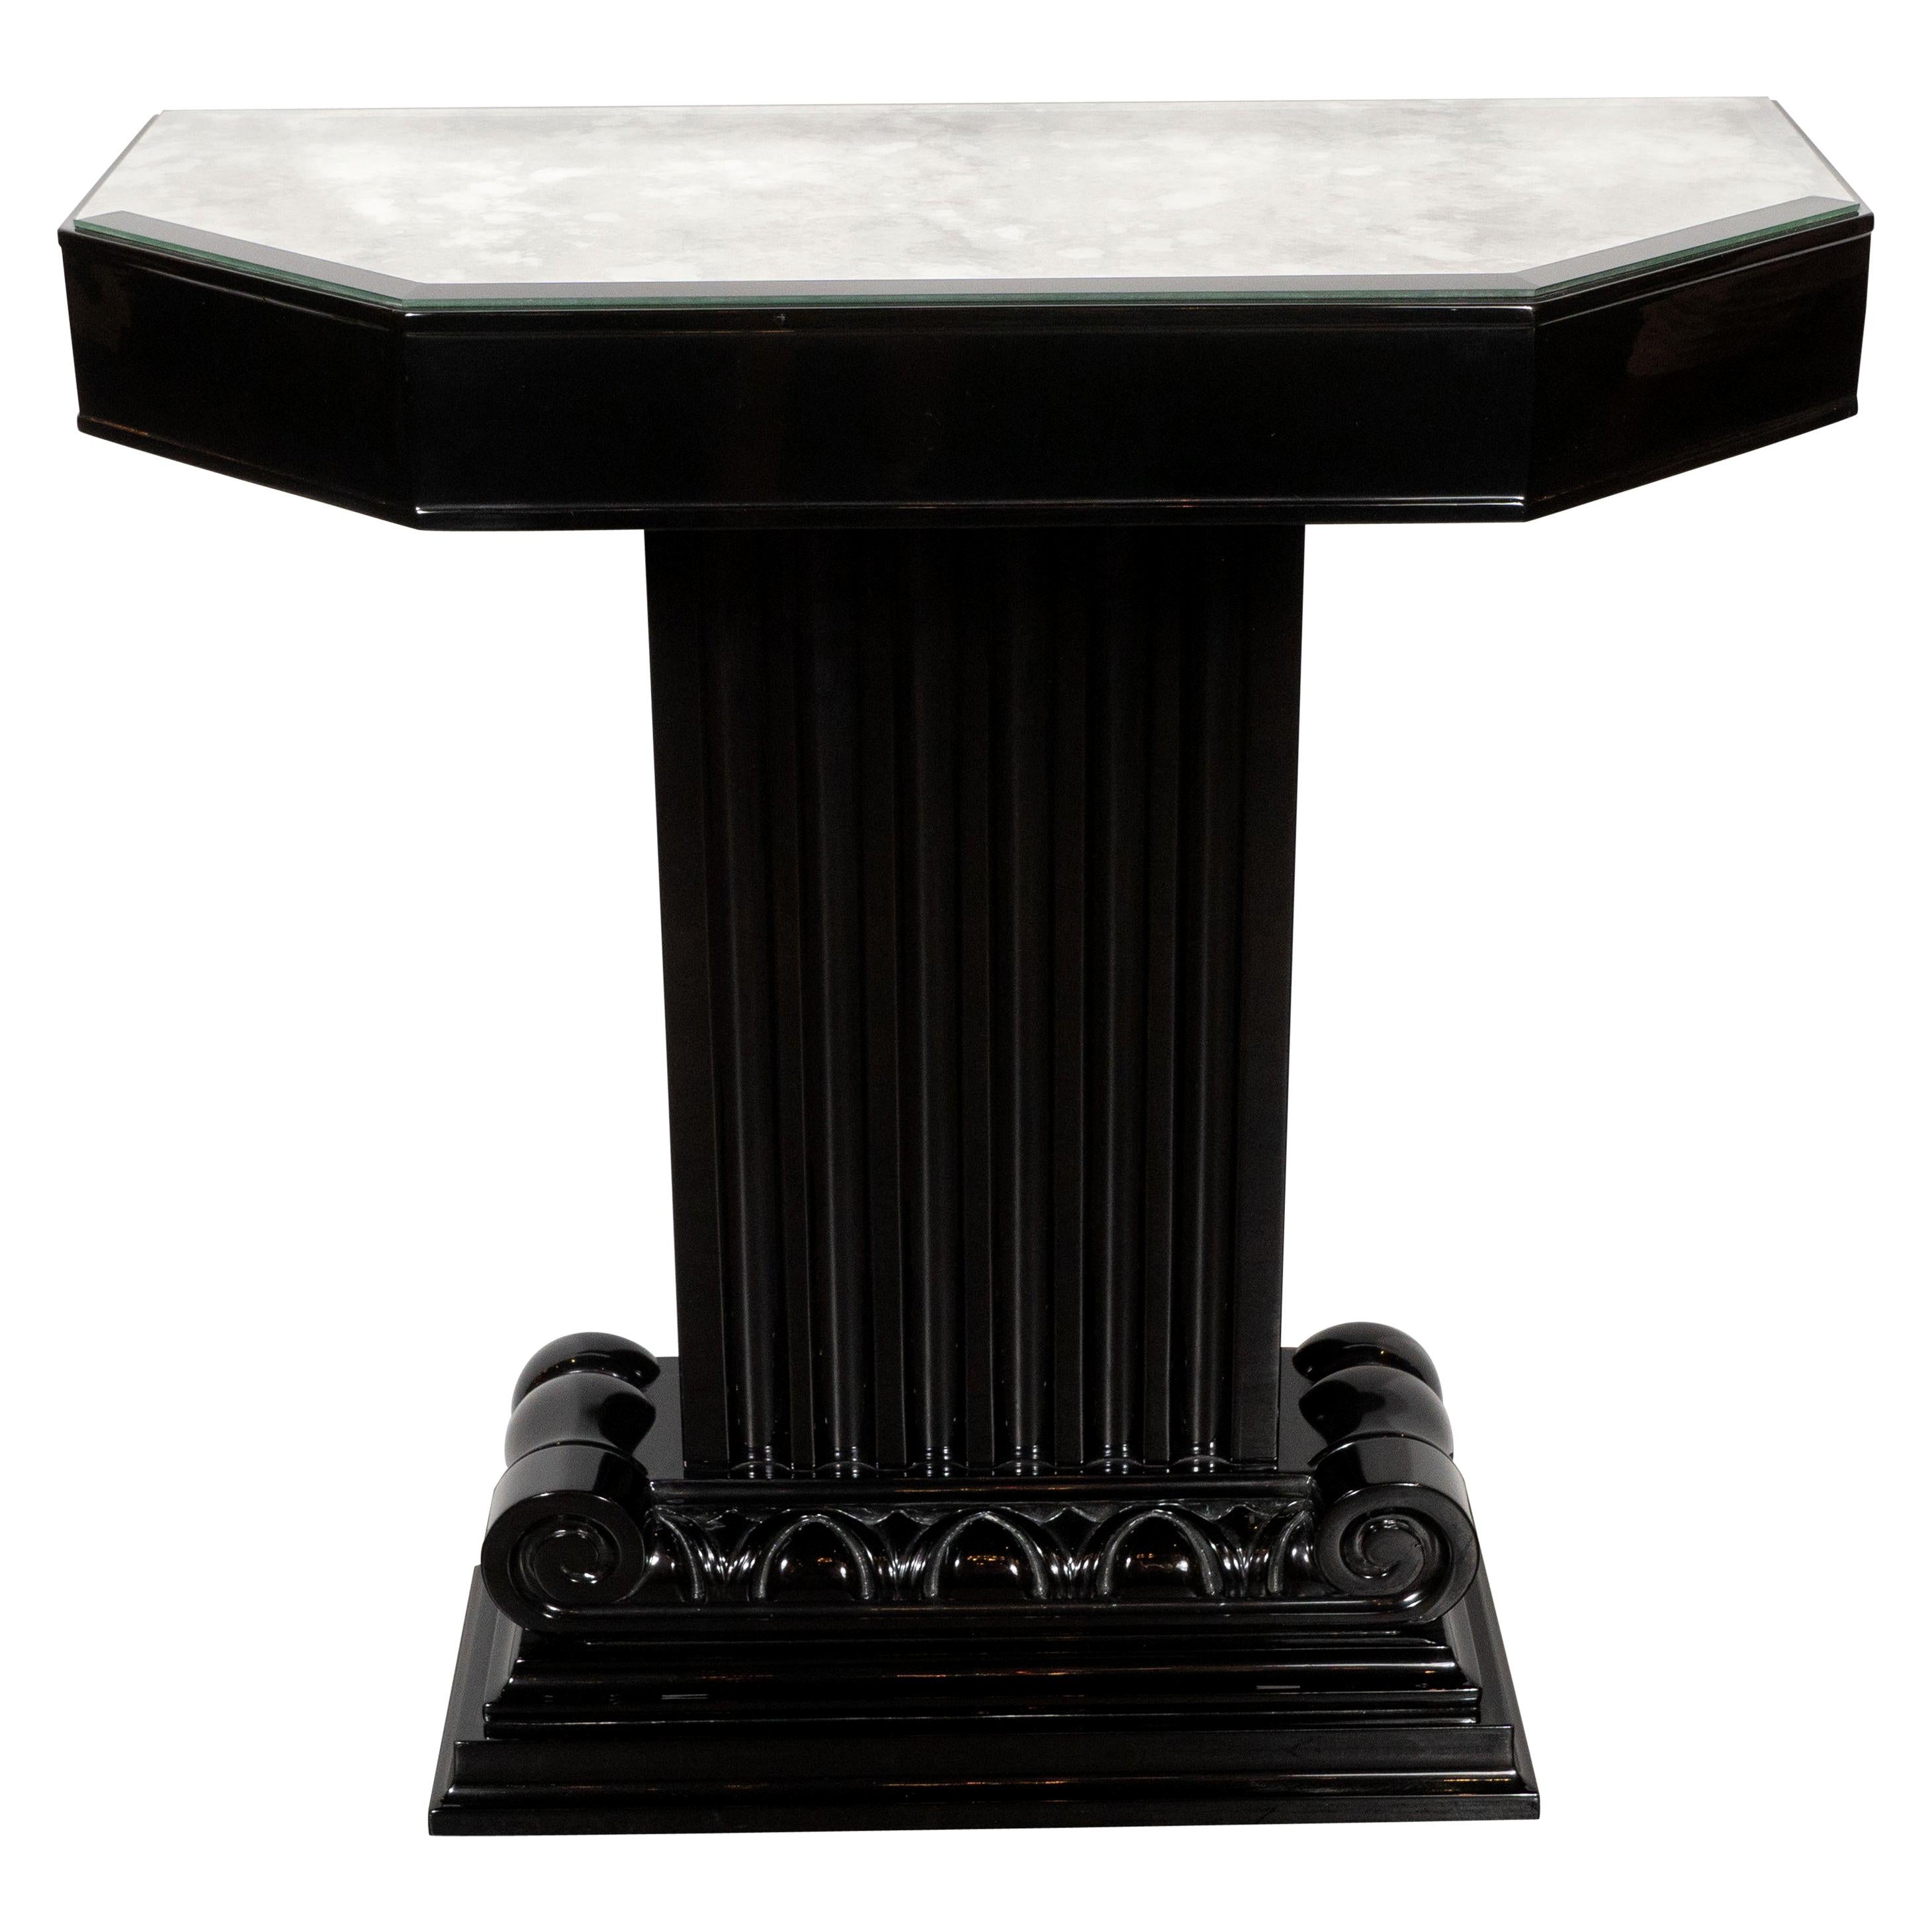 Art Deco Black Lacquer and Antiqued Mirror Console Table by Grosfeld House